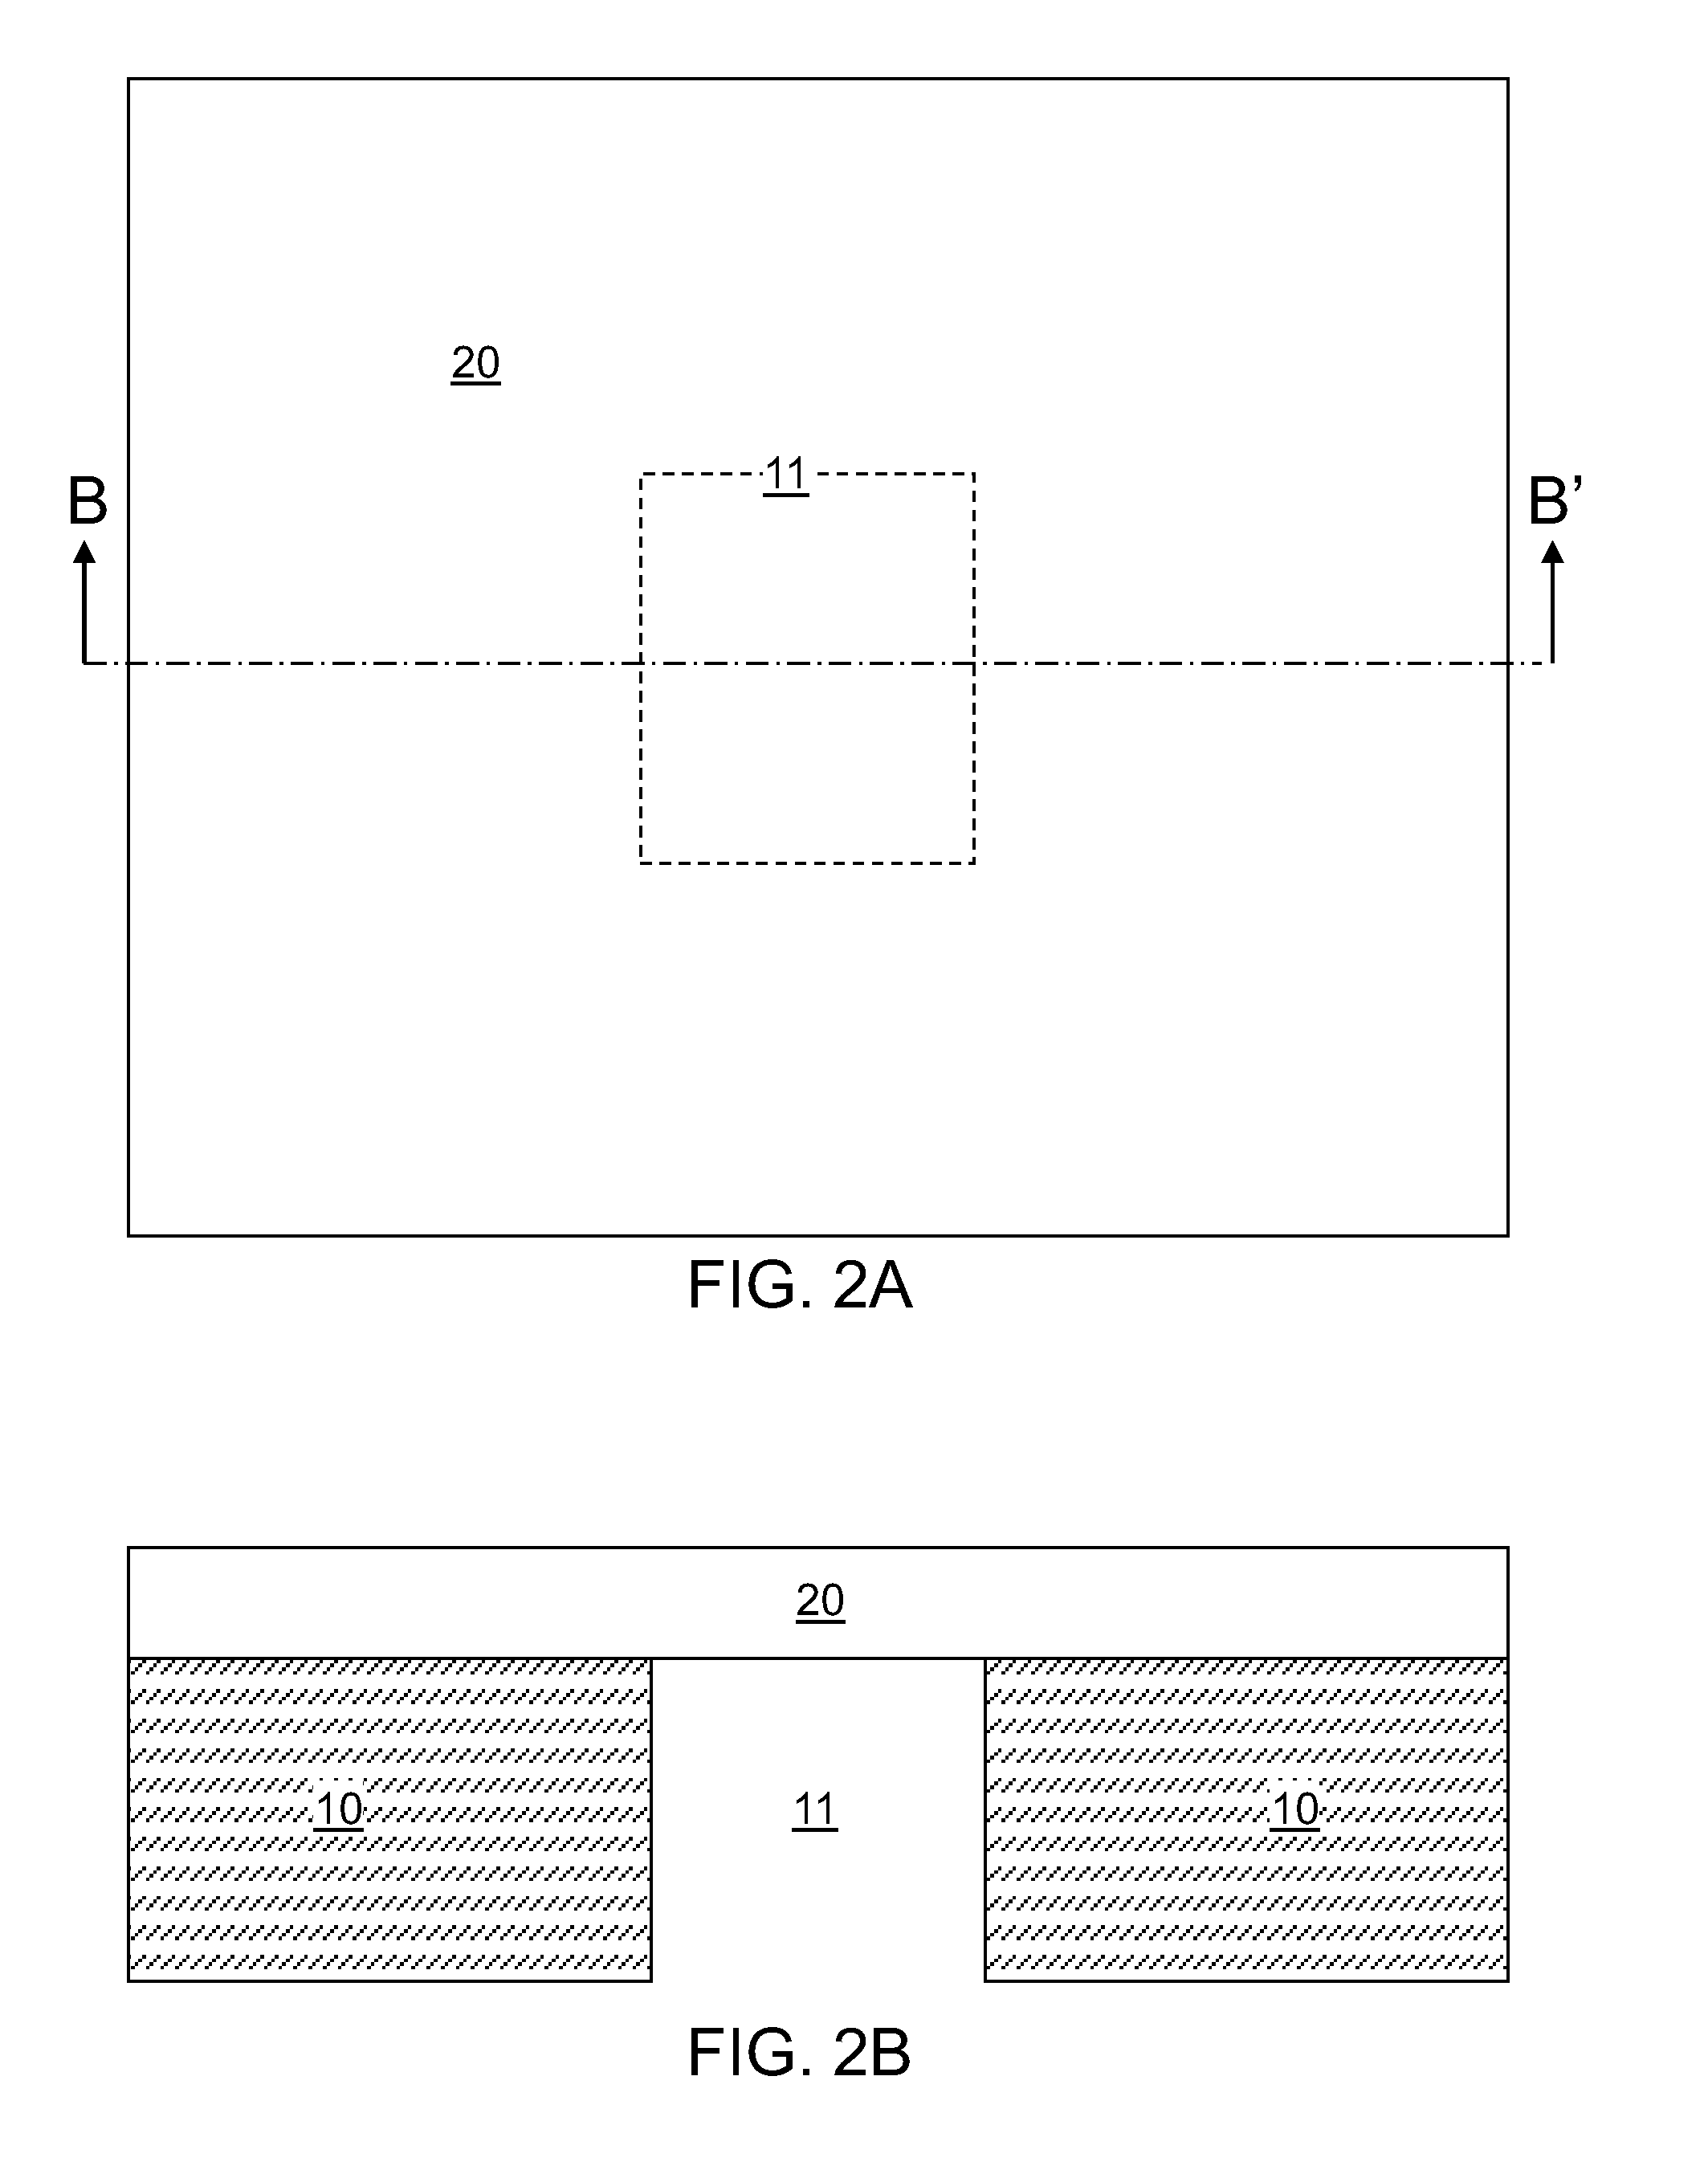 Optoelectronic device employing a microcavity including a two-dimensional carbon lattice structure